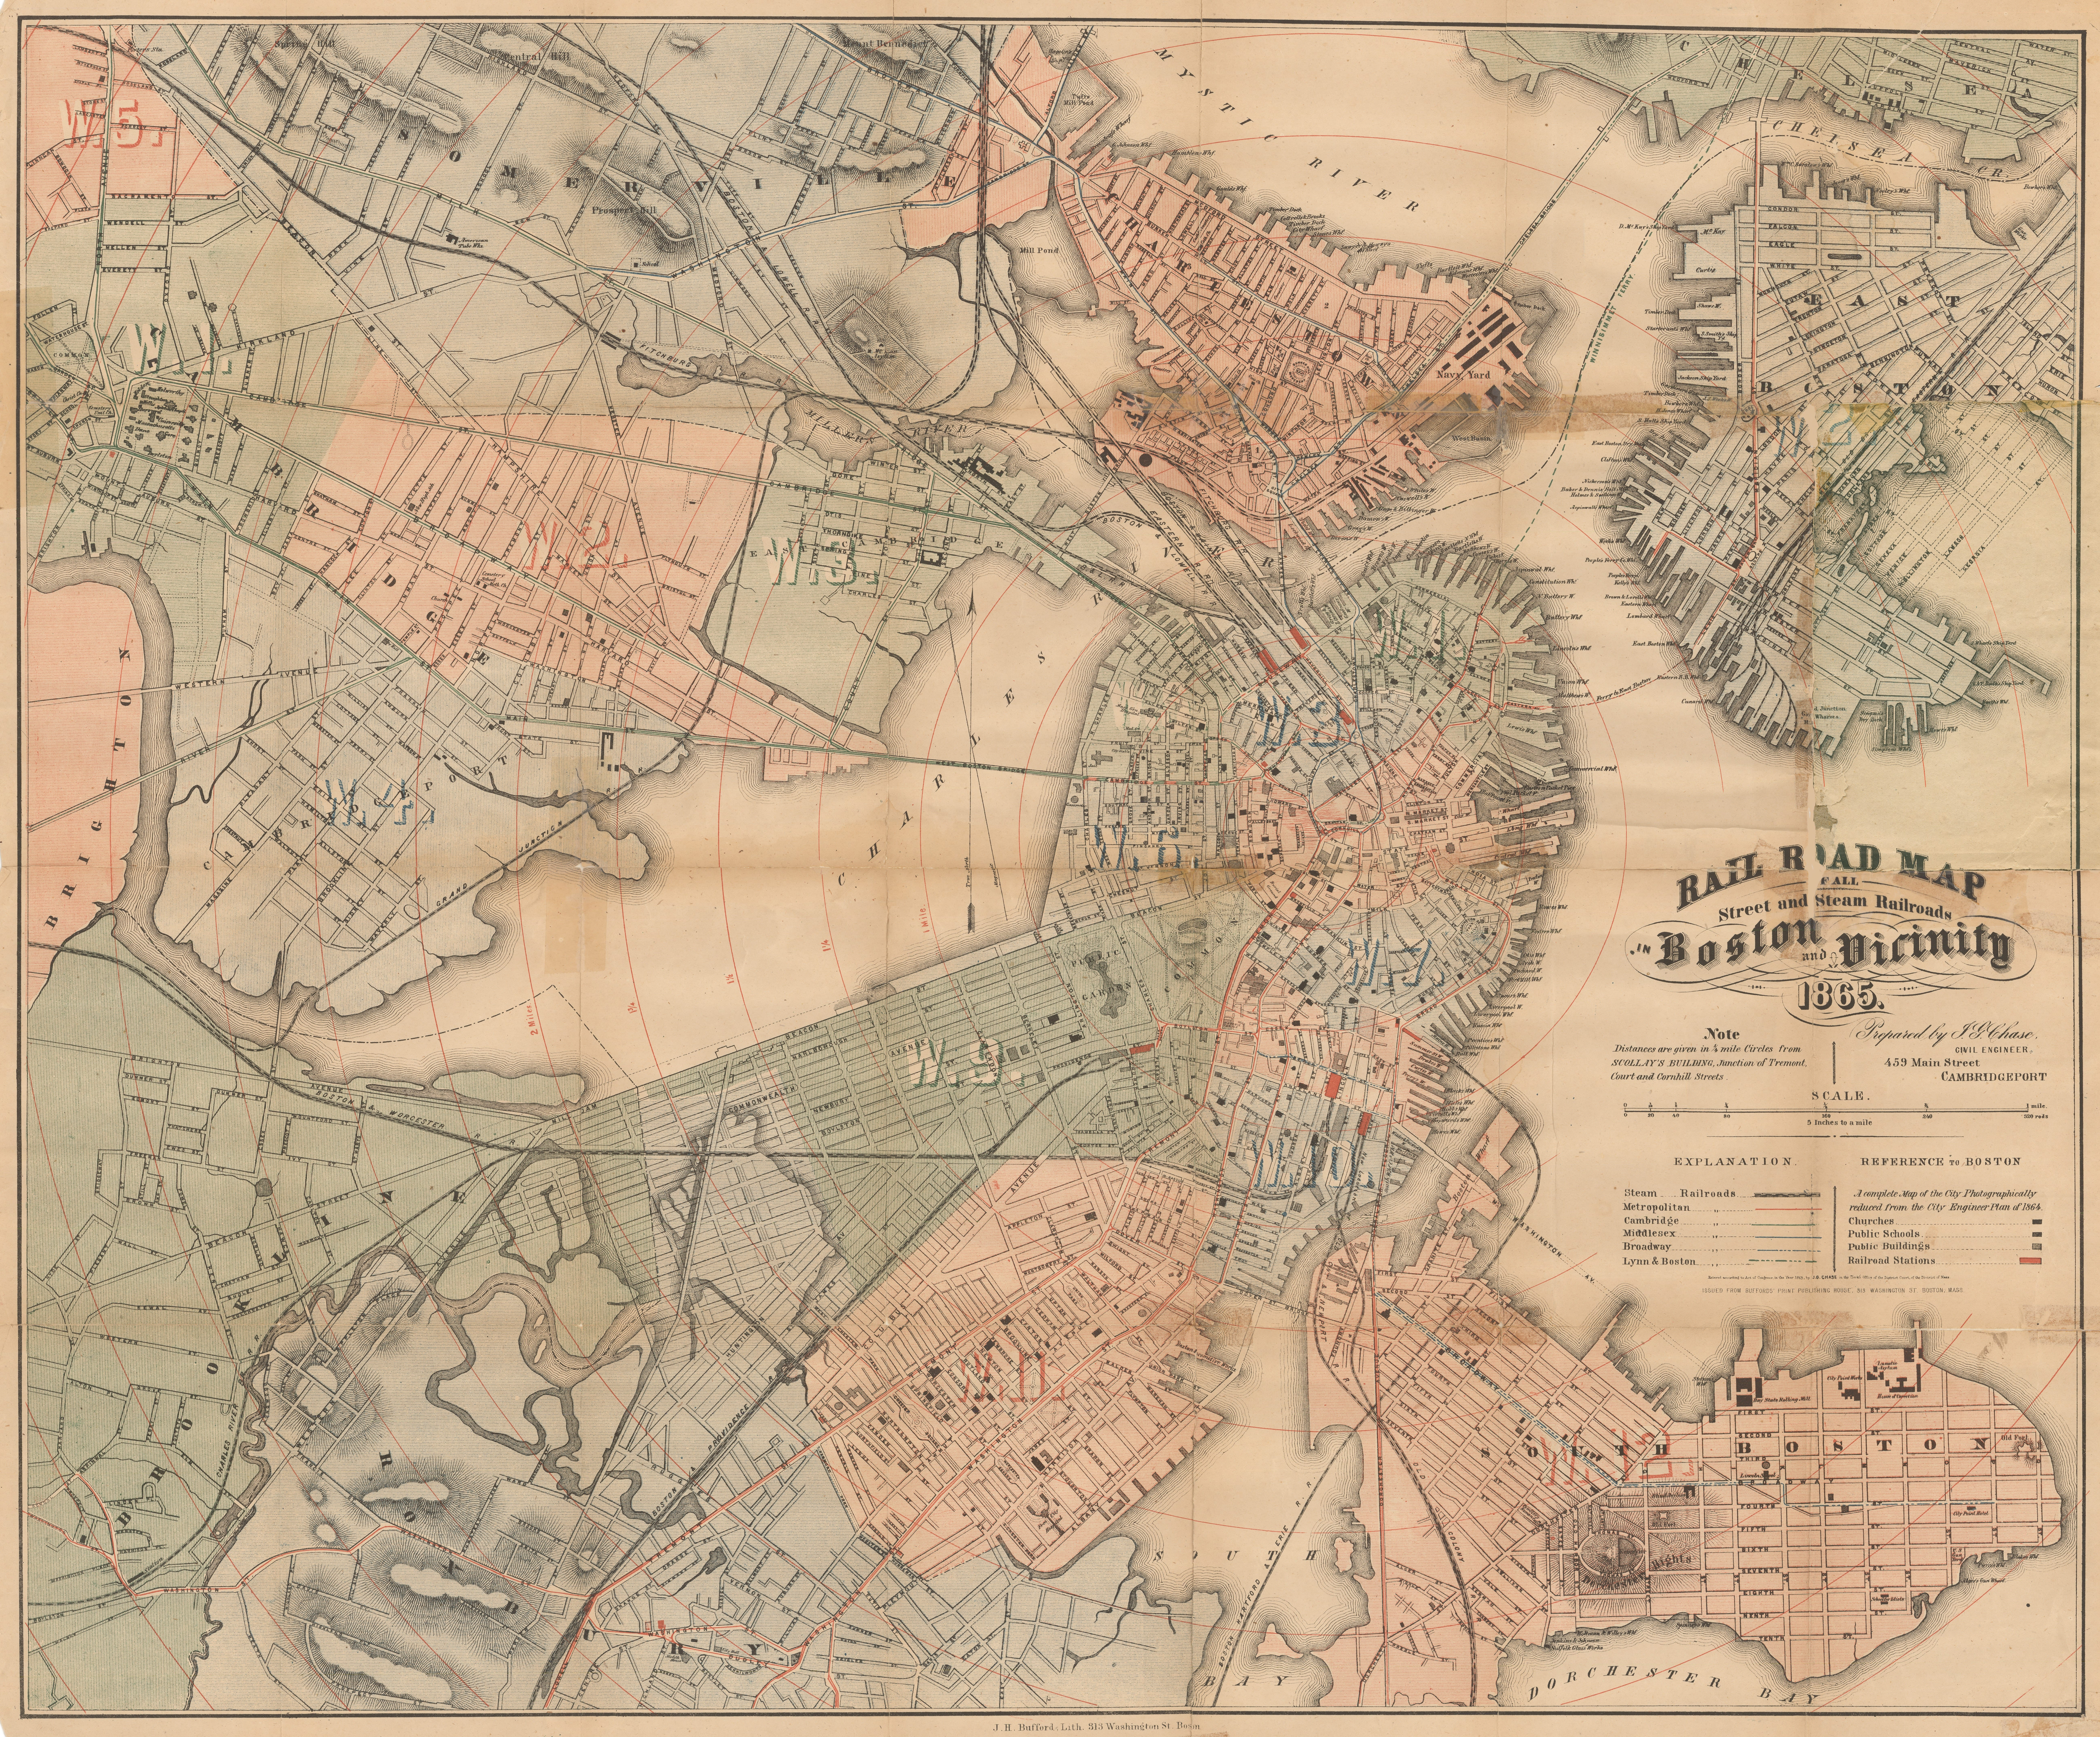 Image of Rail Road Map of All Street and Steam Railroads in Boston and Vicinity